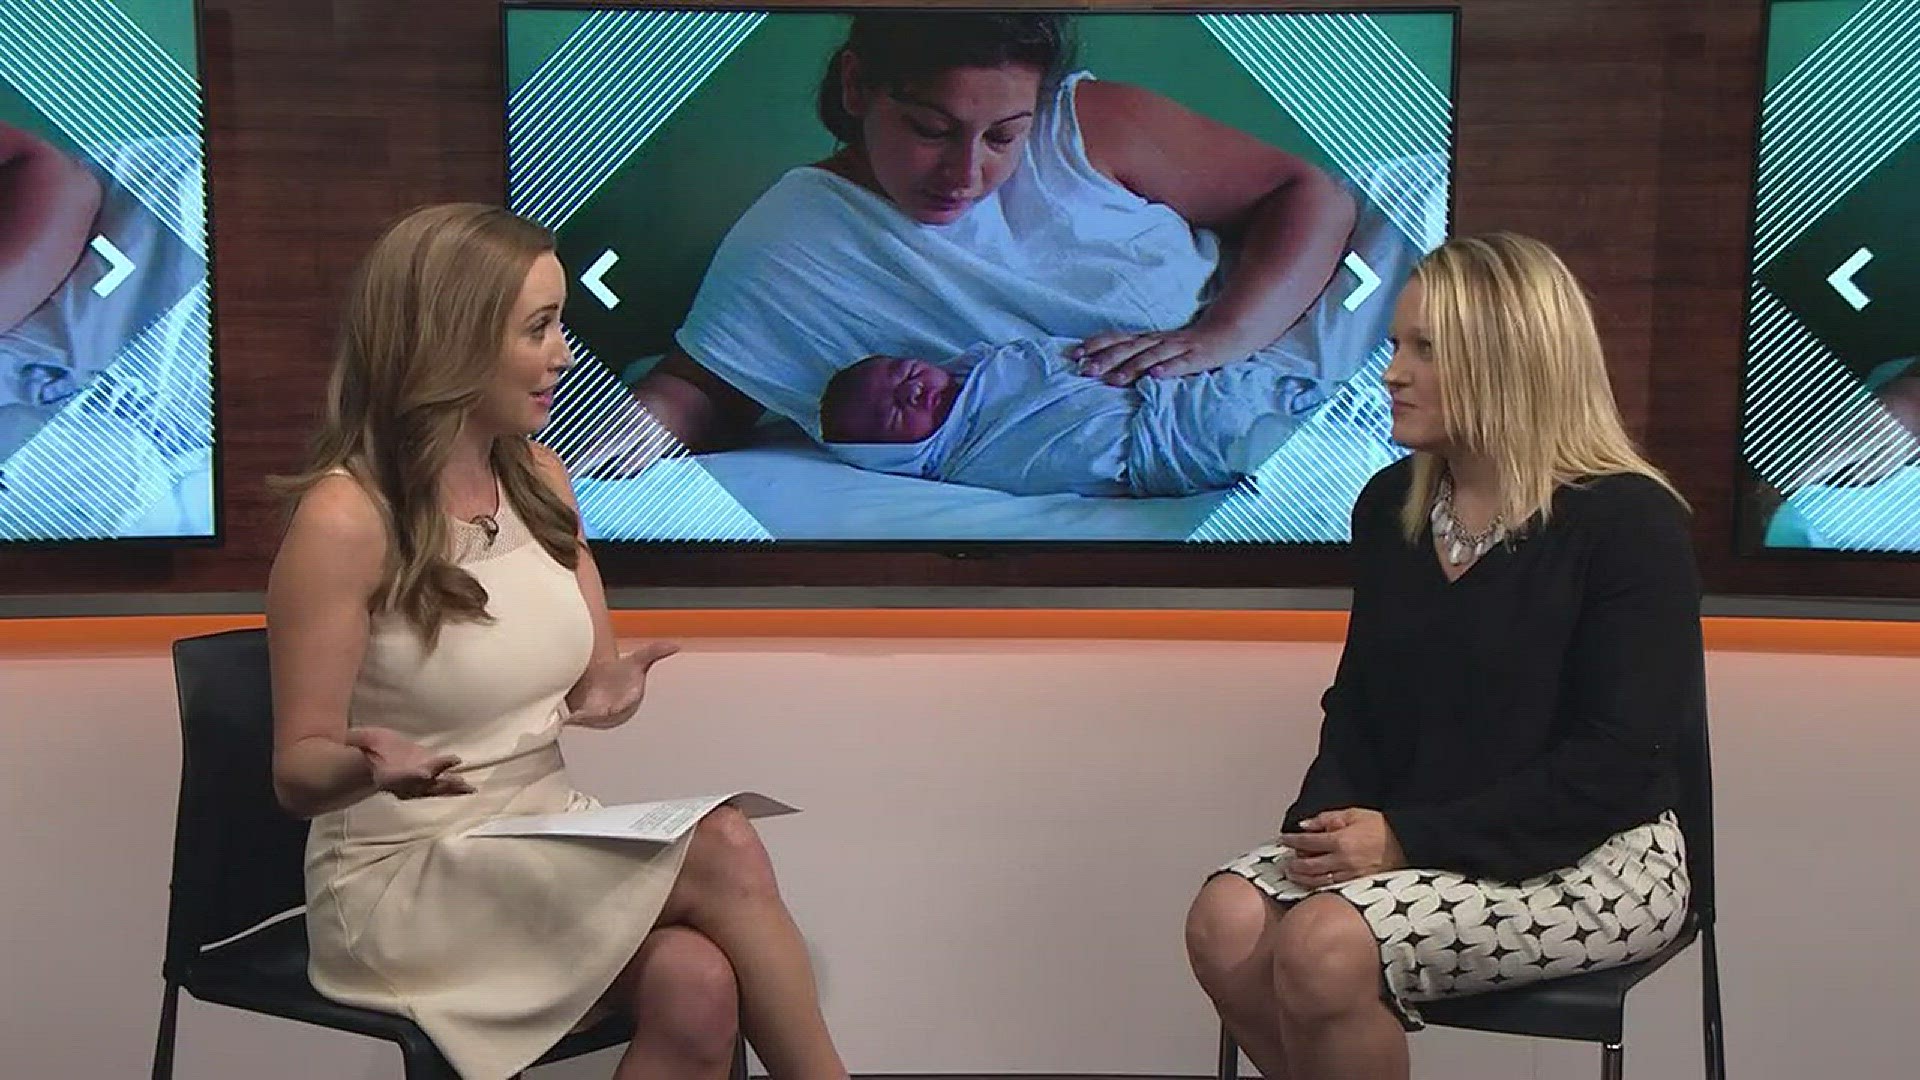 Jessica Anderson, Director of Midwifery at UCHealth, explain some challenges new moms can face.